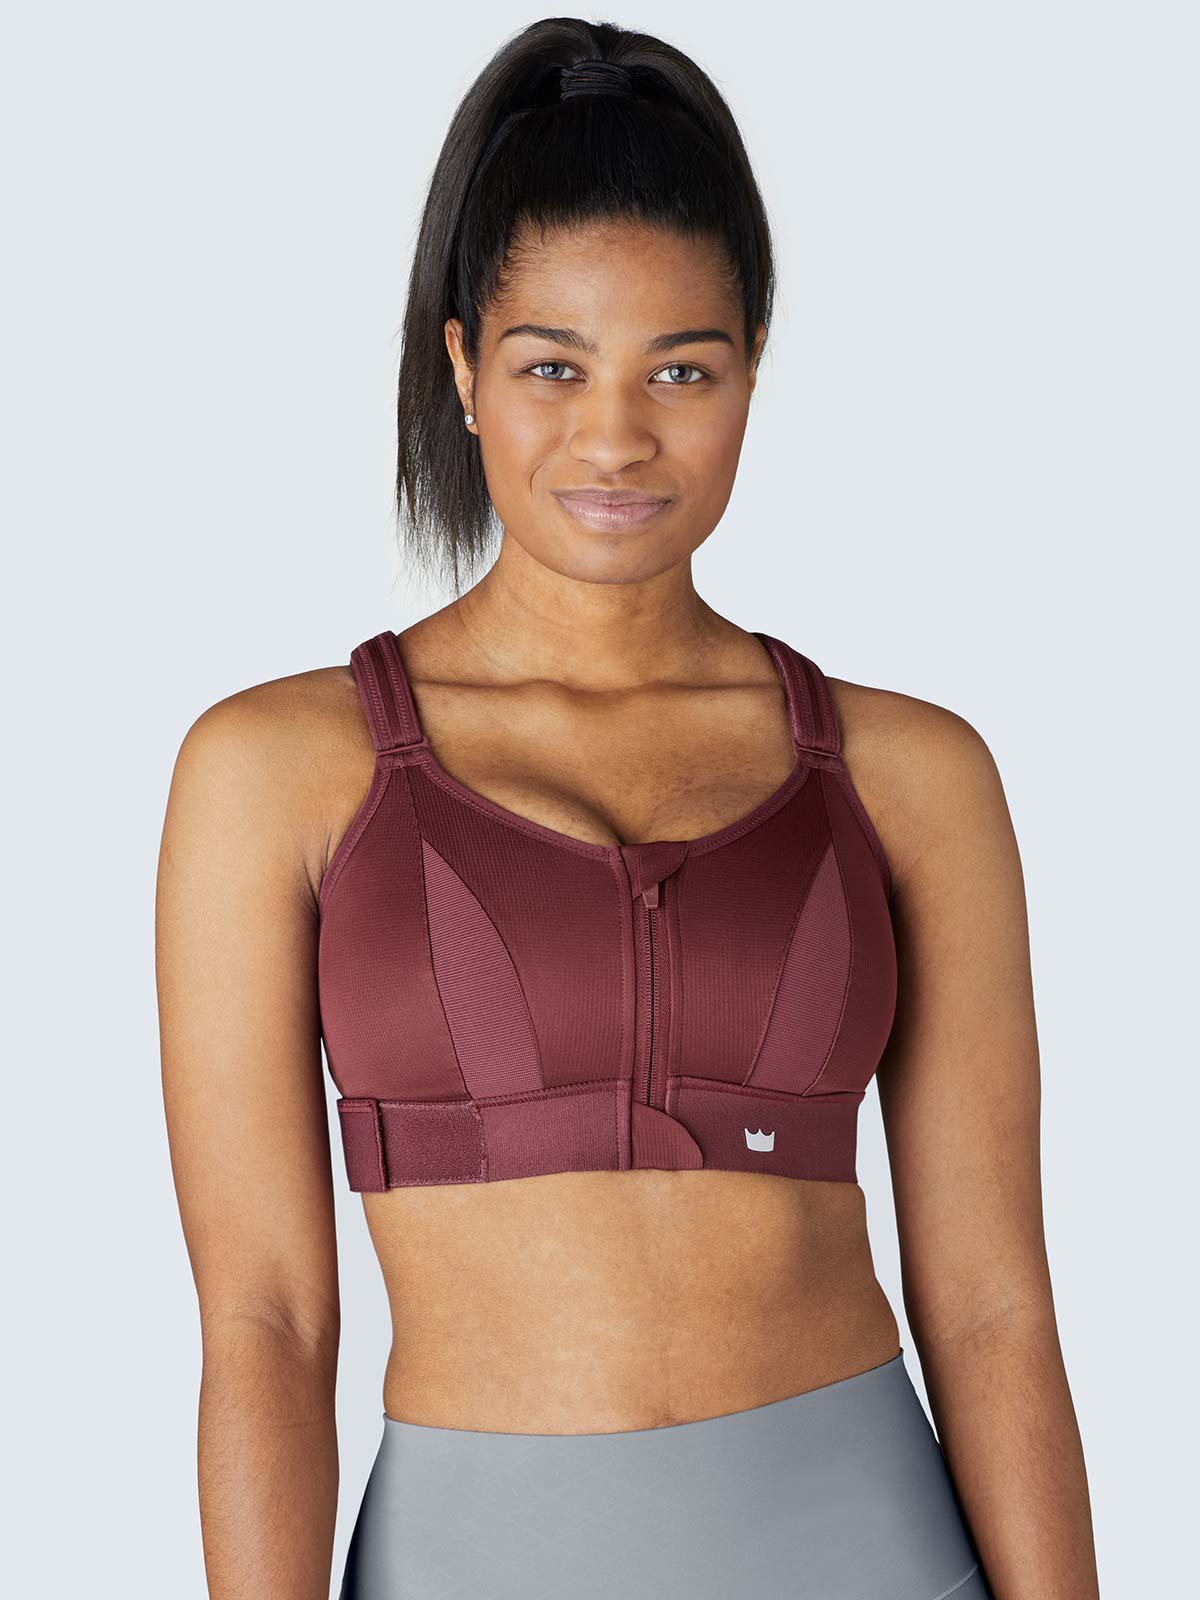 SHEFIT Ultimate Sports Bra for Women - High Impact Support & Adjustability